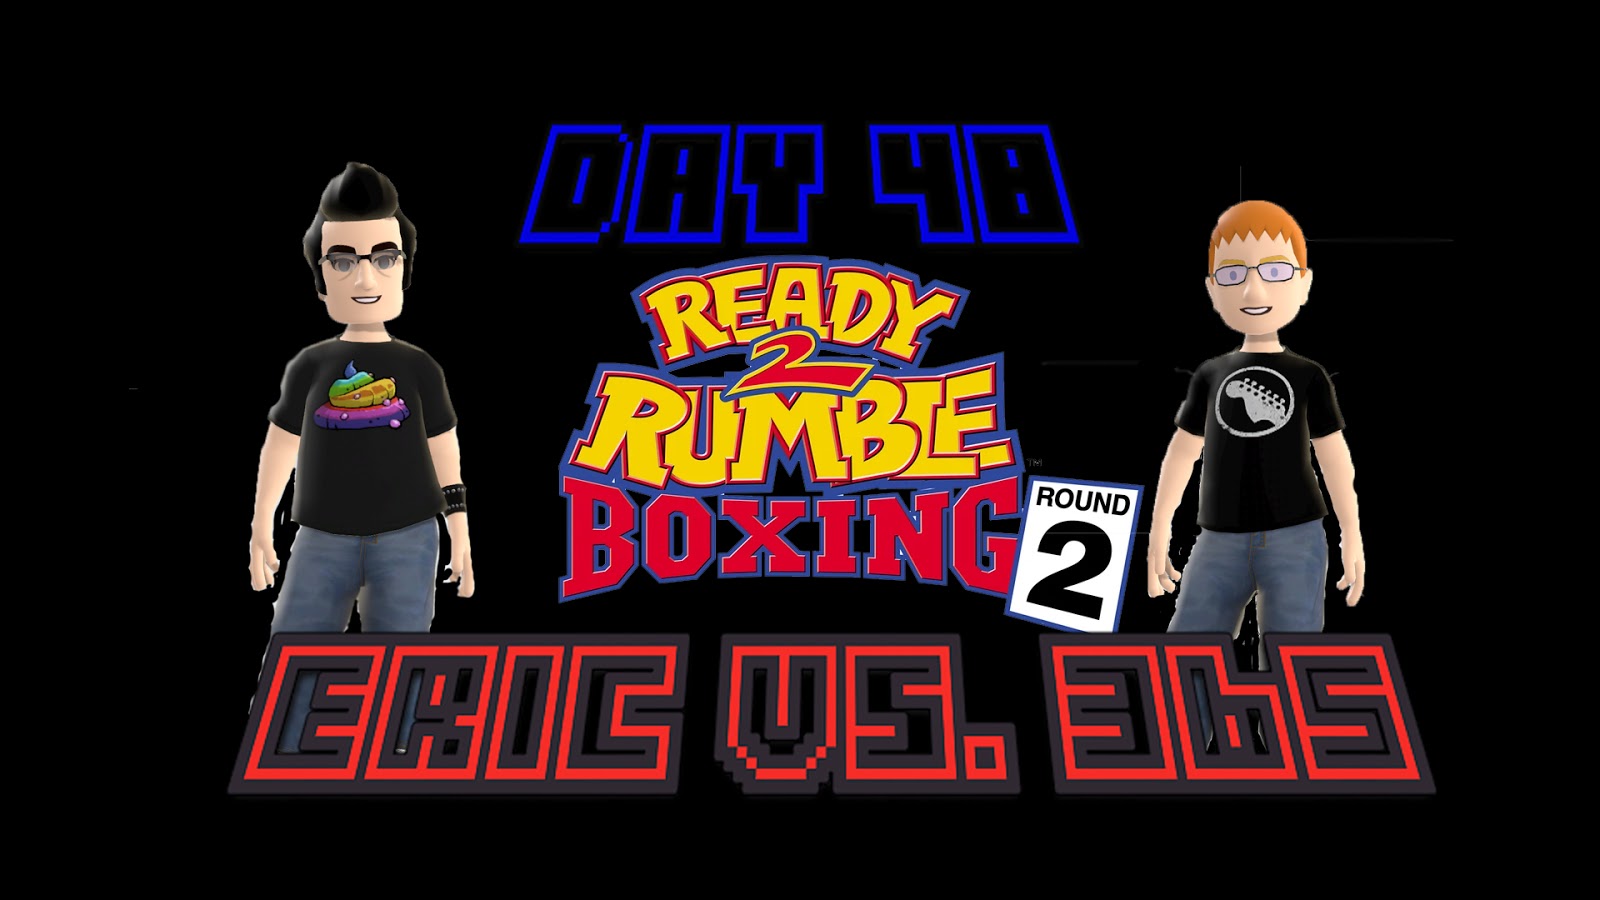 Ready 2 Rumble Boxing Dreamcast. Ready 2 Rumble Boxing: Round 2 ps2. Ready 2 Rumble Boxing Round 2 ps1. Ready 2 use